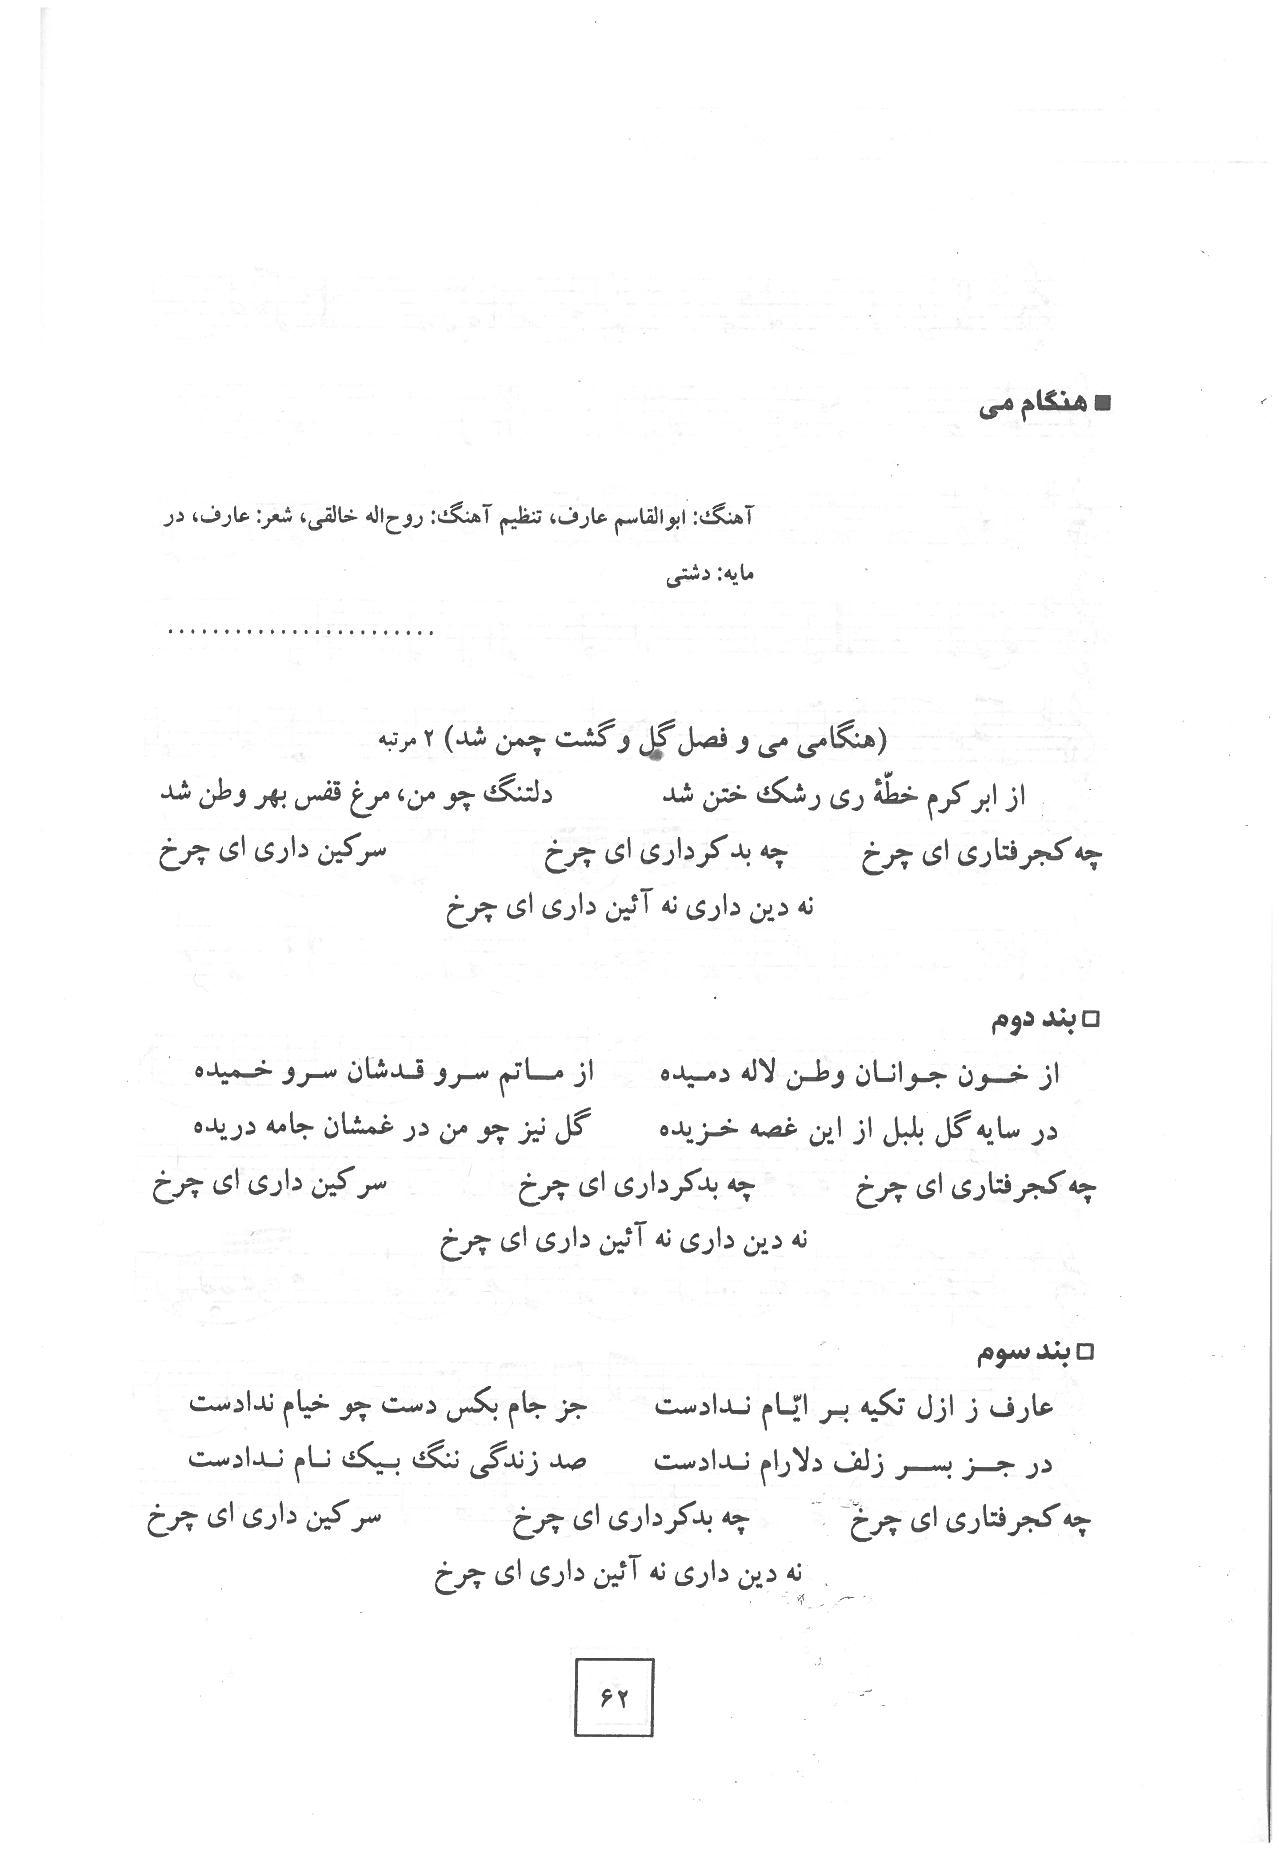 A page of an arabic language text with writing.